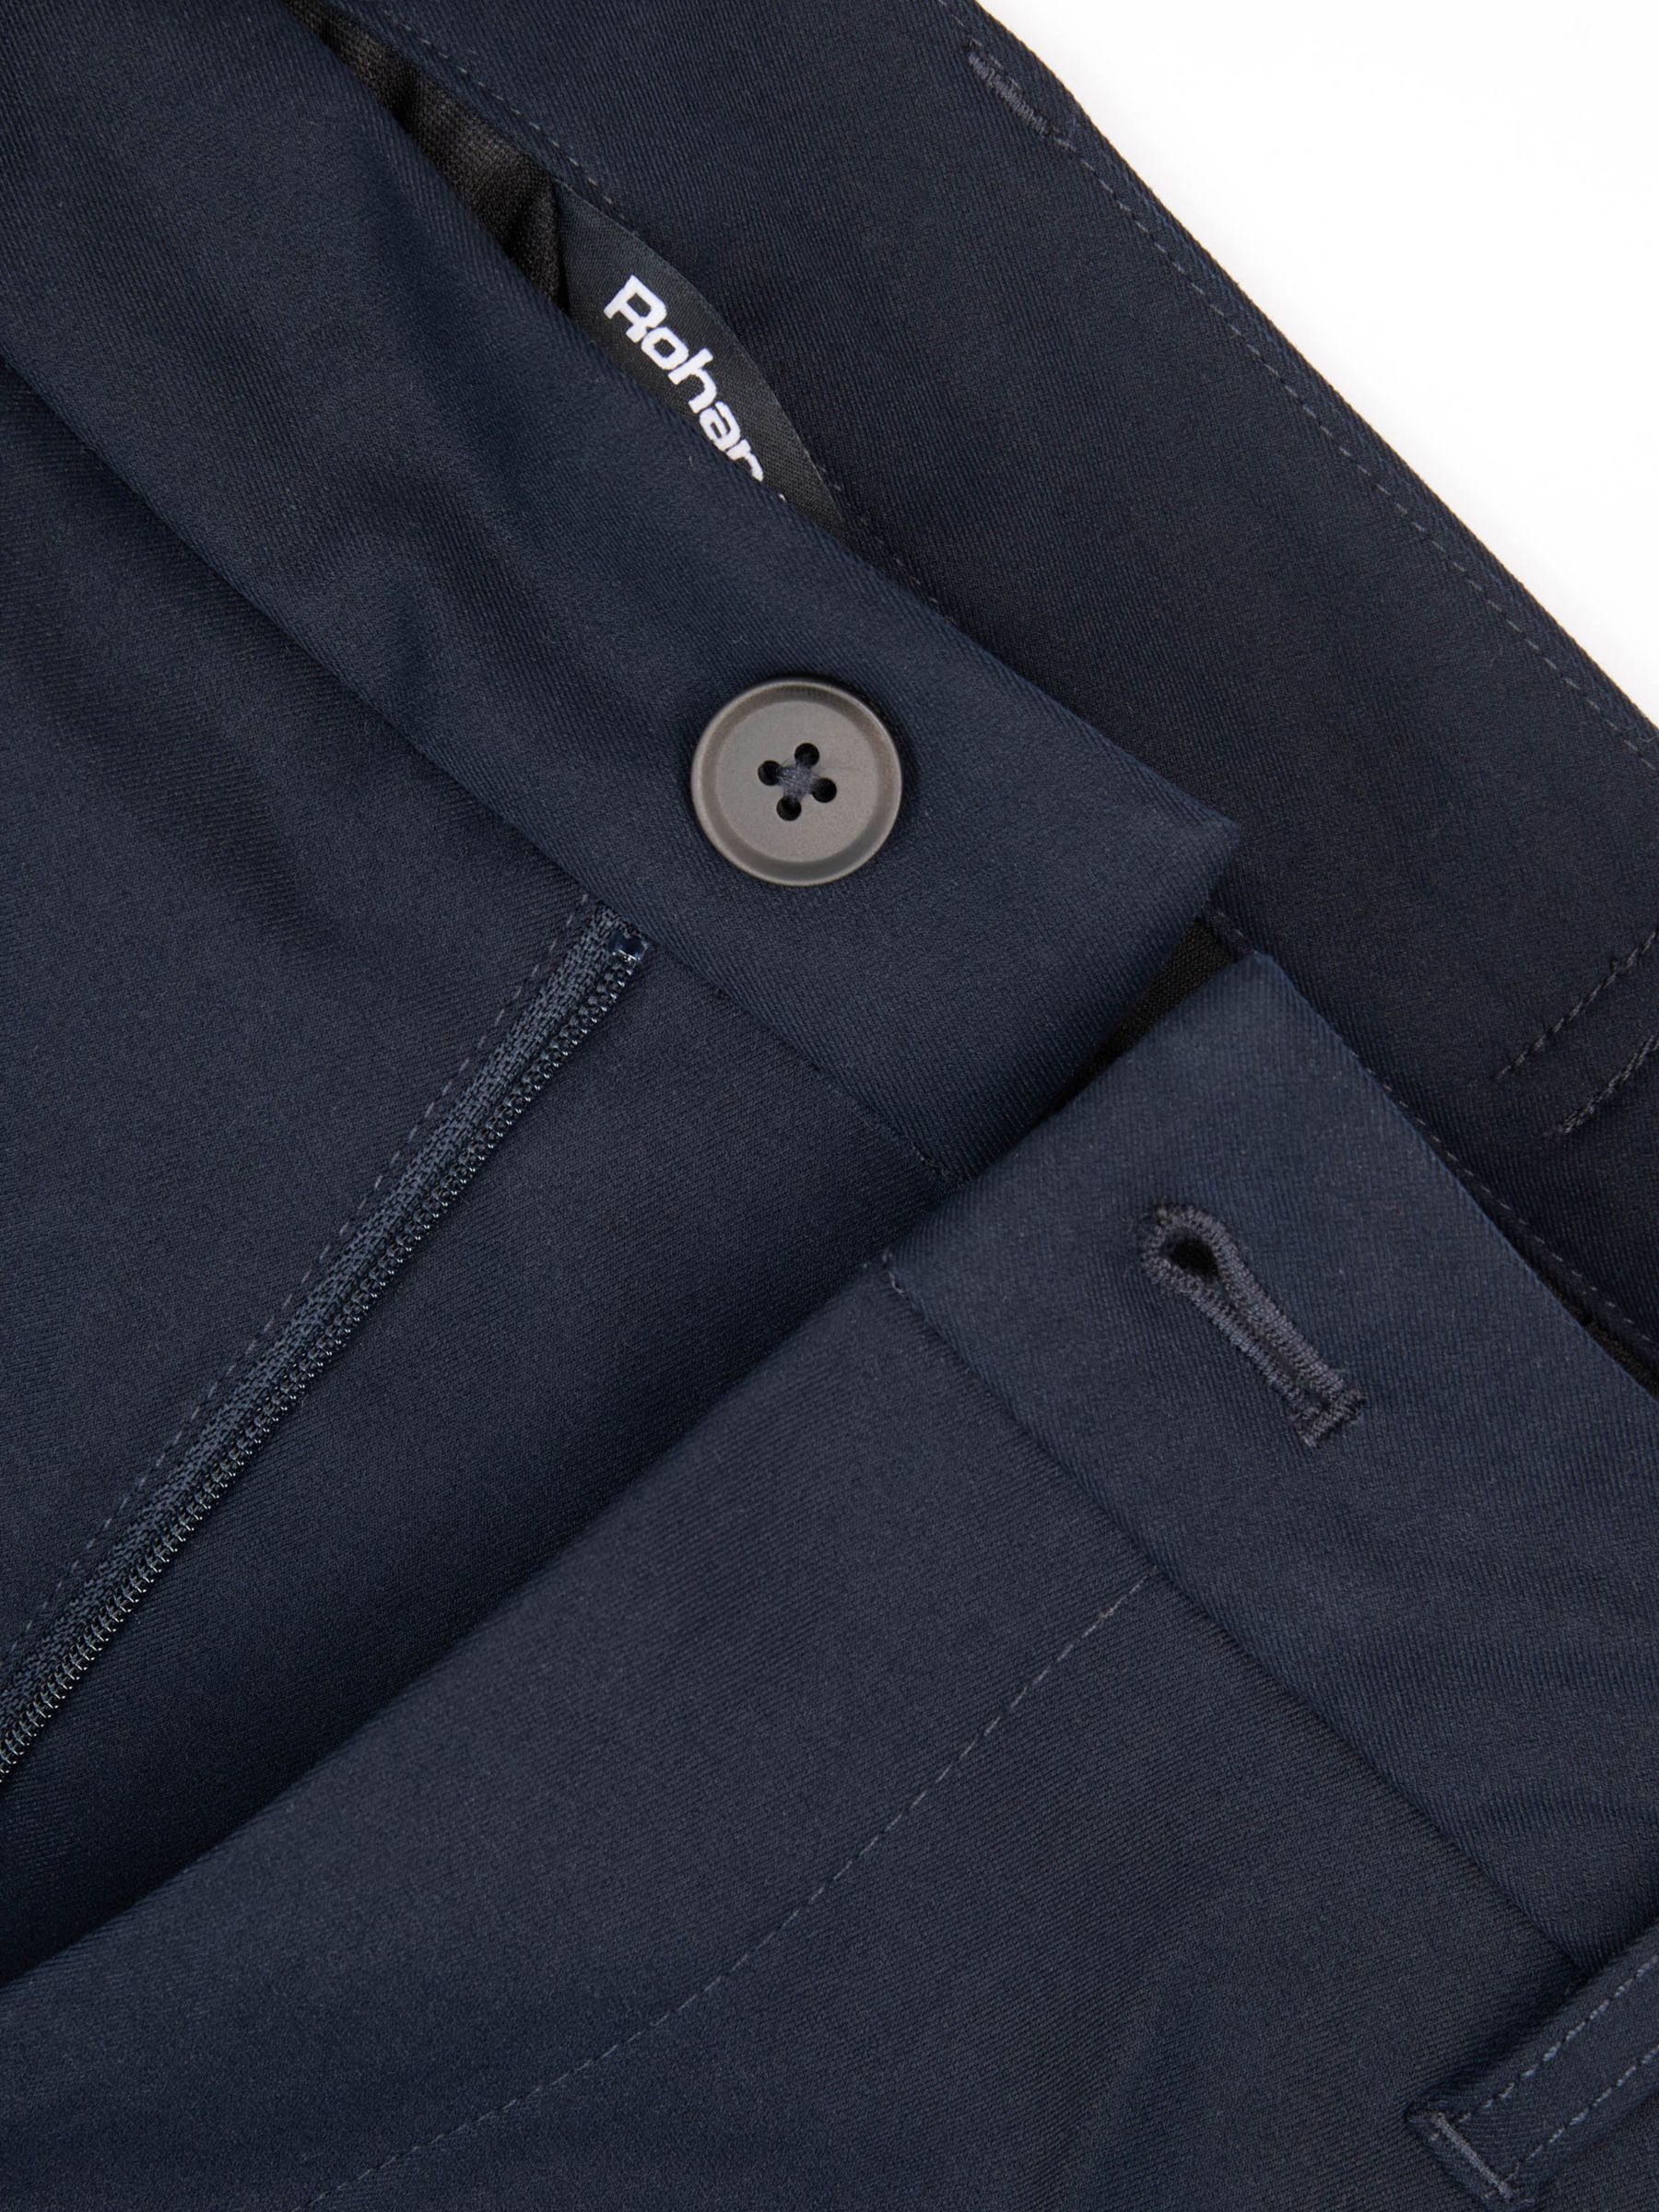 Rohan Dry District Waterproof Chinos Trousers, True Navy at John Lewis ...